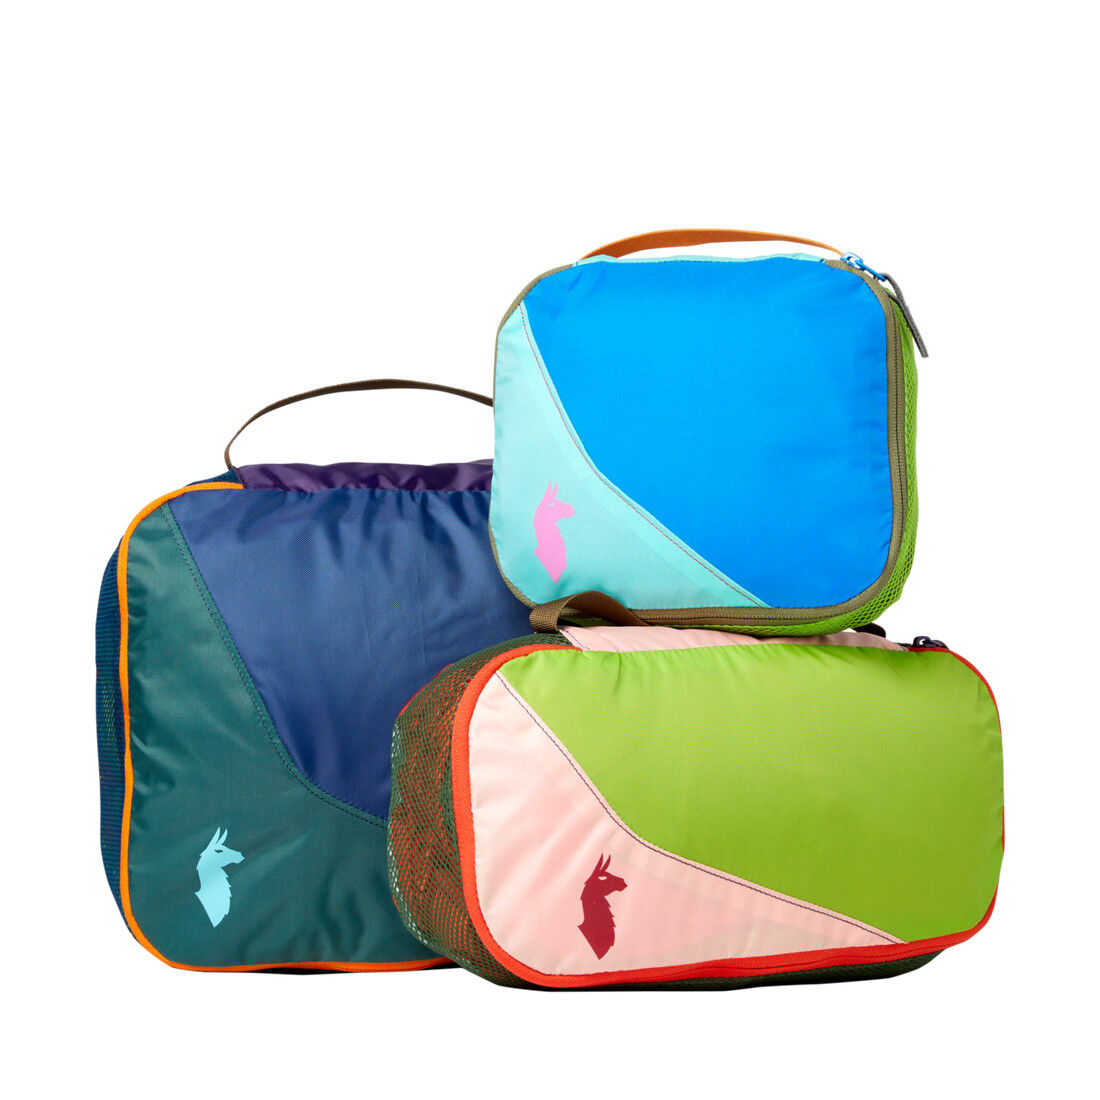 Cotopaxi Cubo Packing Cube Bundle - Packing Cube | Hardloop